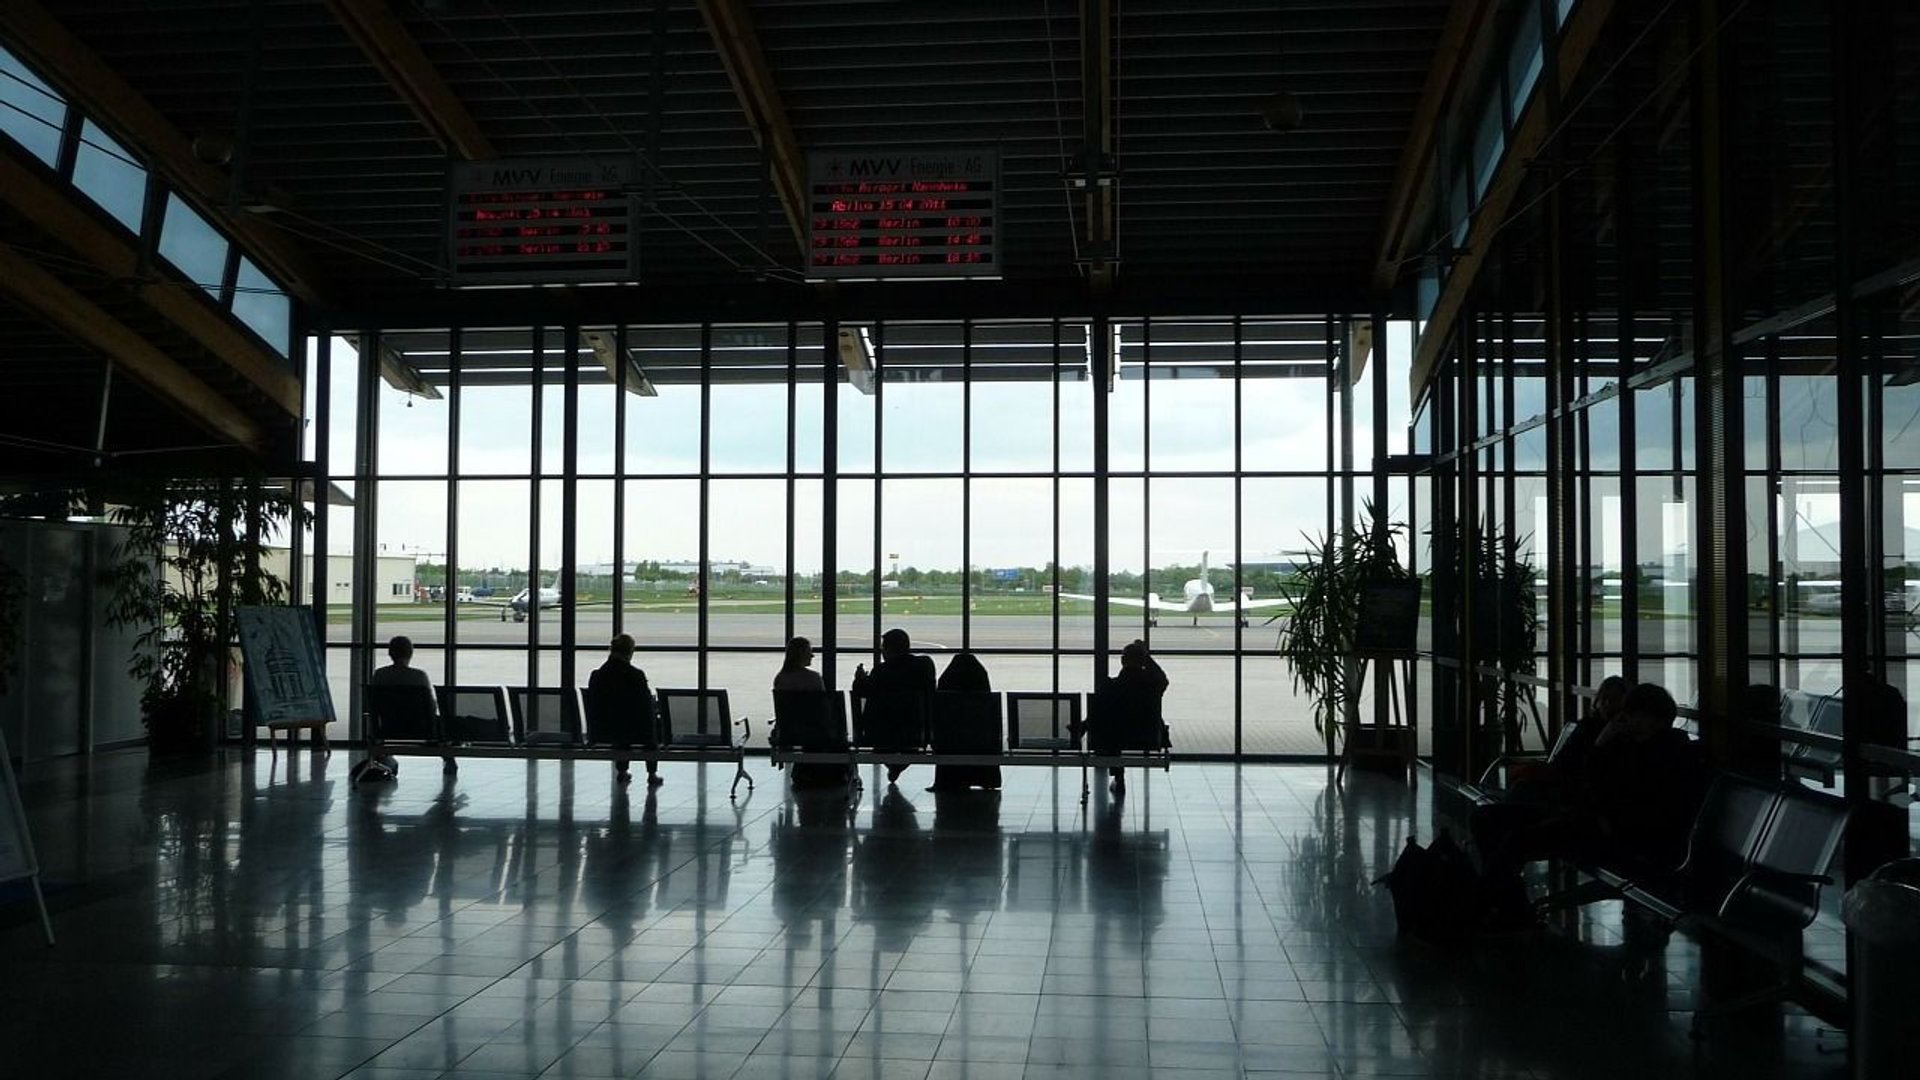 airport-g34a1c0ddb 1280